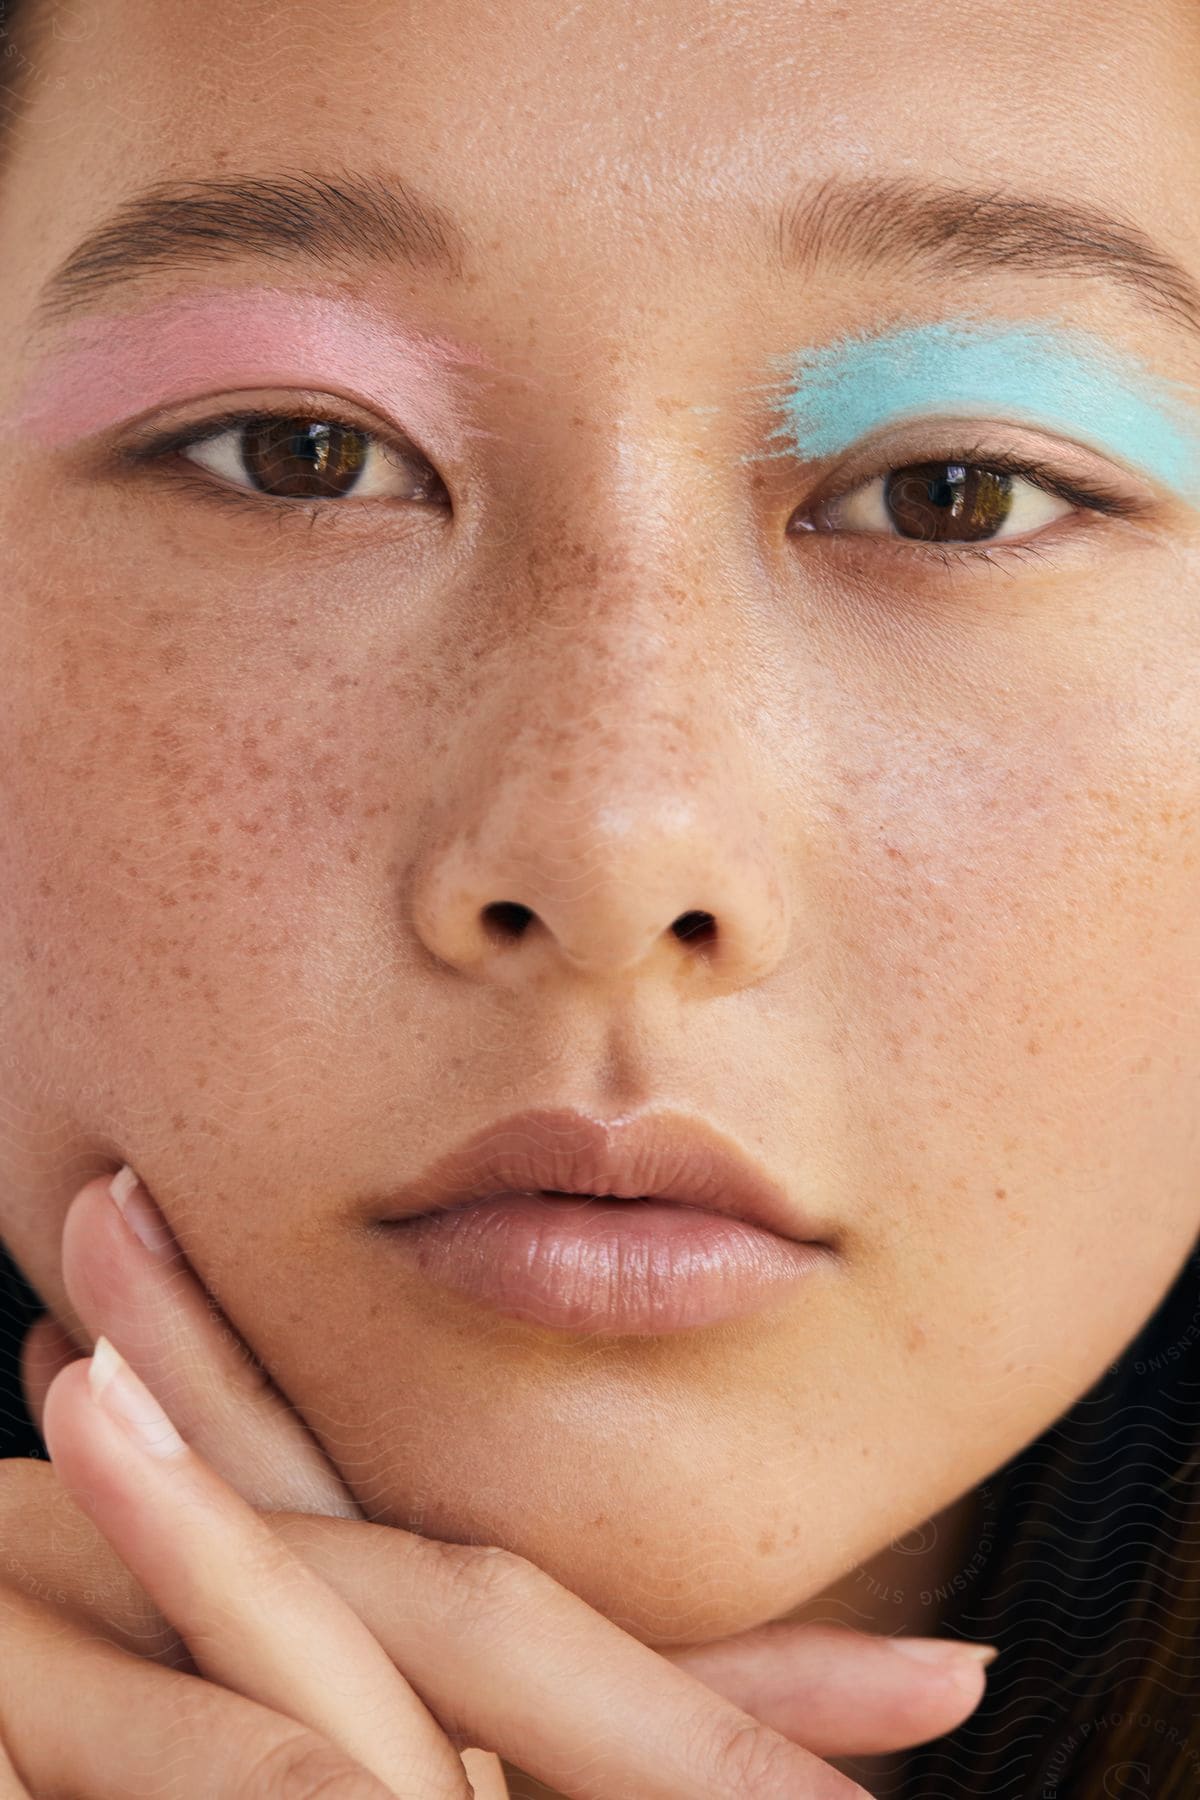 A young Asian woman with freckles has two different colors of eye shadow applied over each eye.